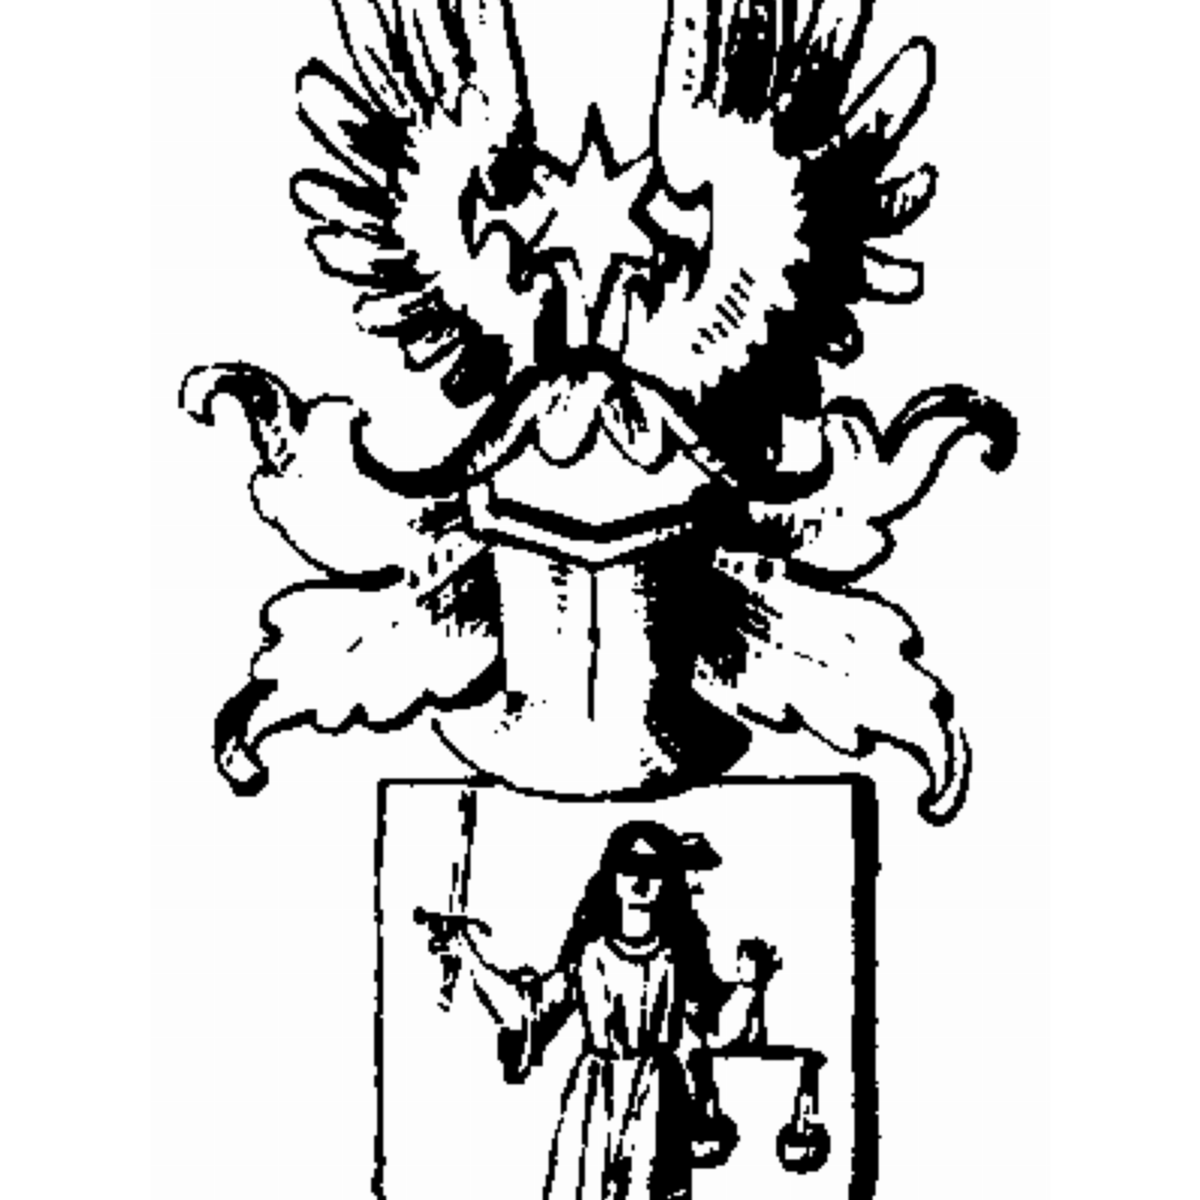 Coat of arms of family Petit